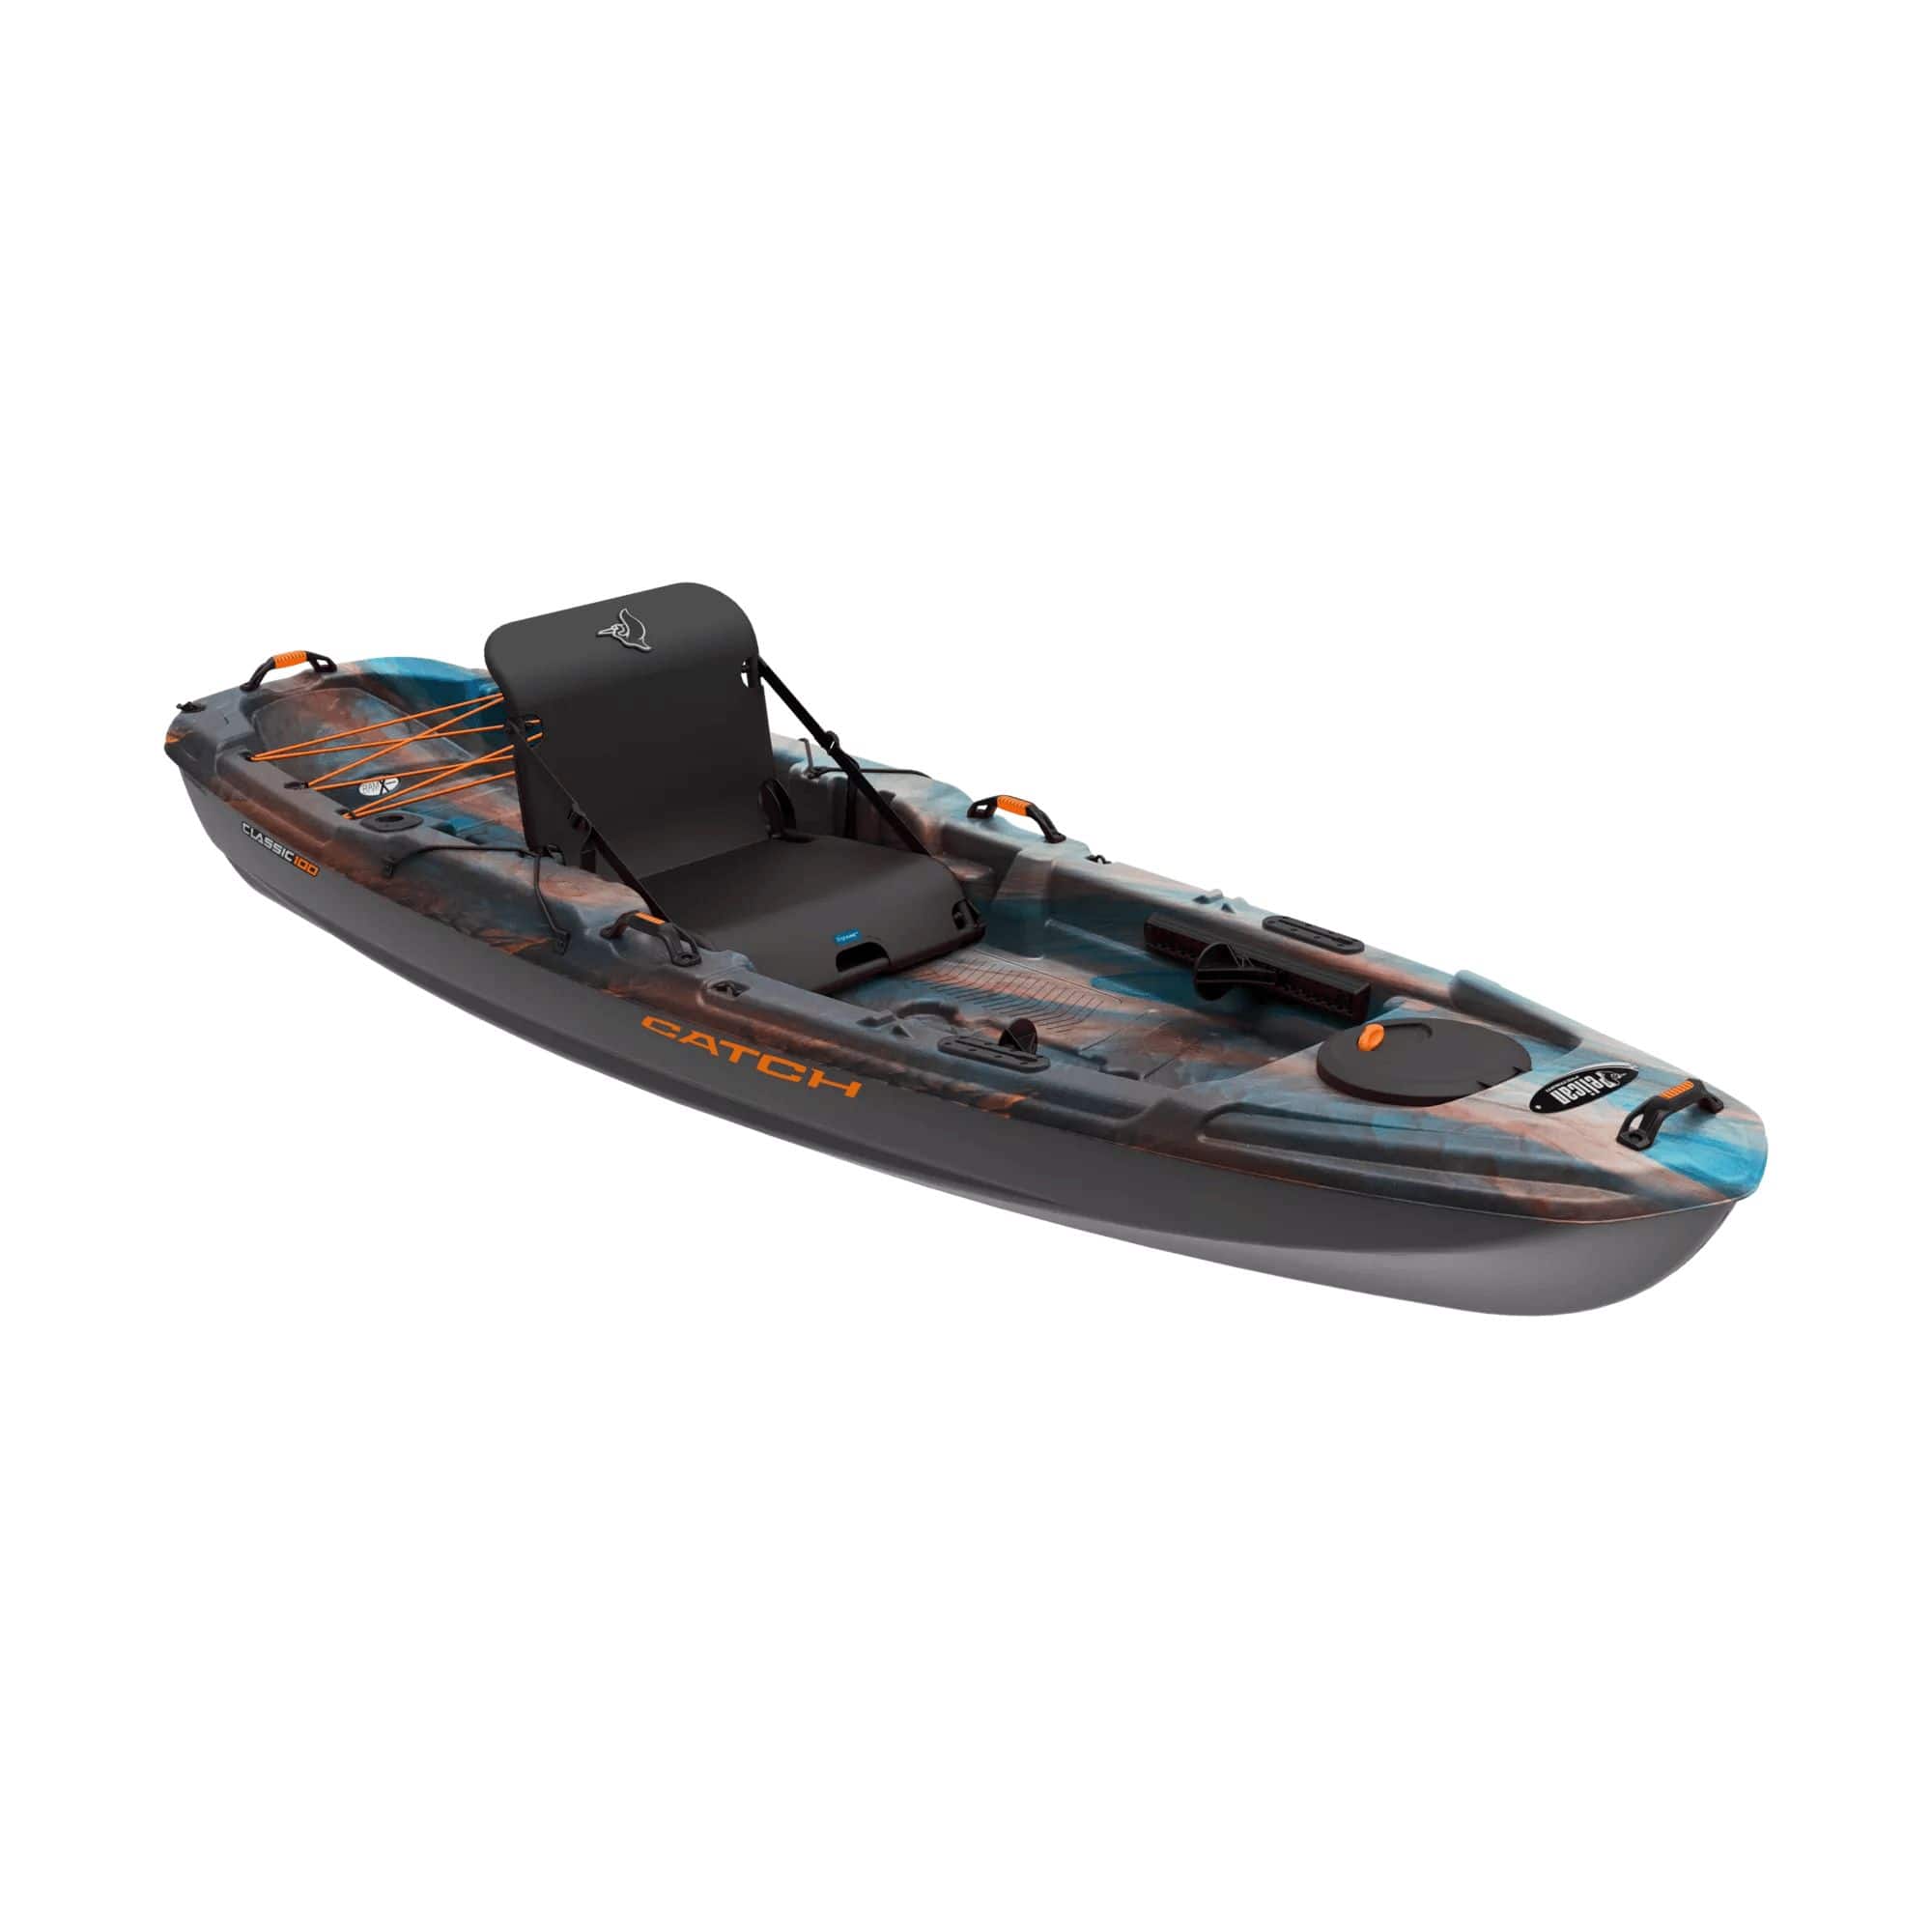 Pelican Catch 100 Classic Fishing Kayak, 1-Person, Camouflage